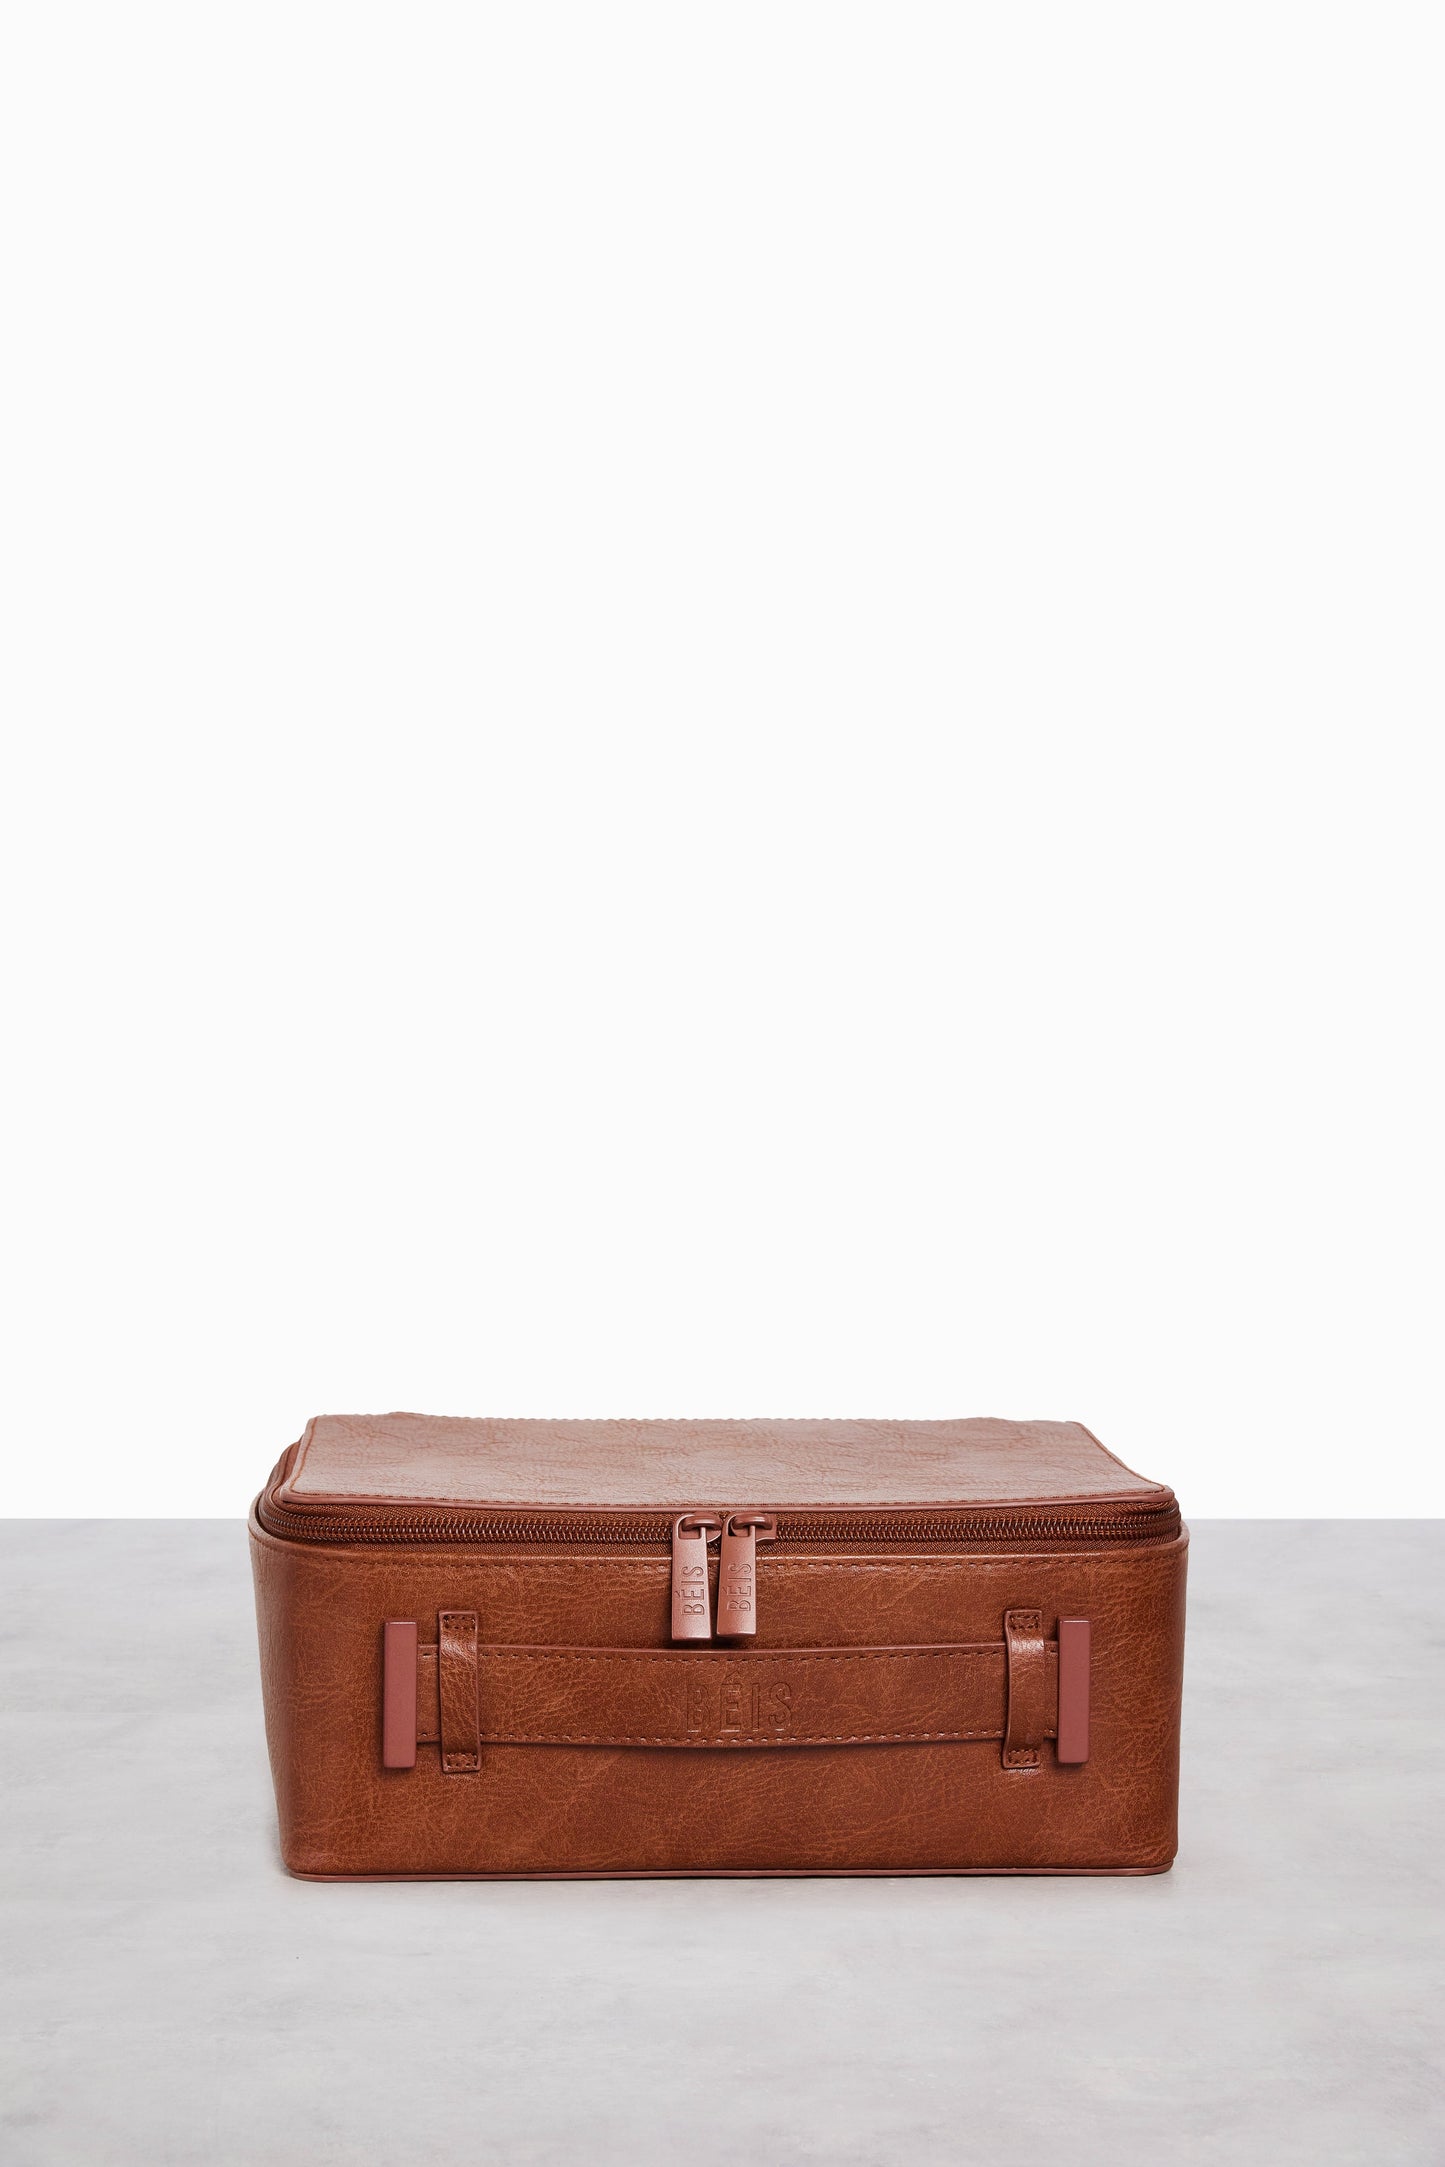 The Cosmetic Case in Maple